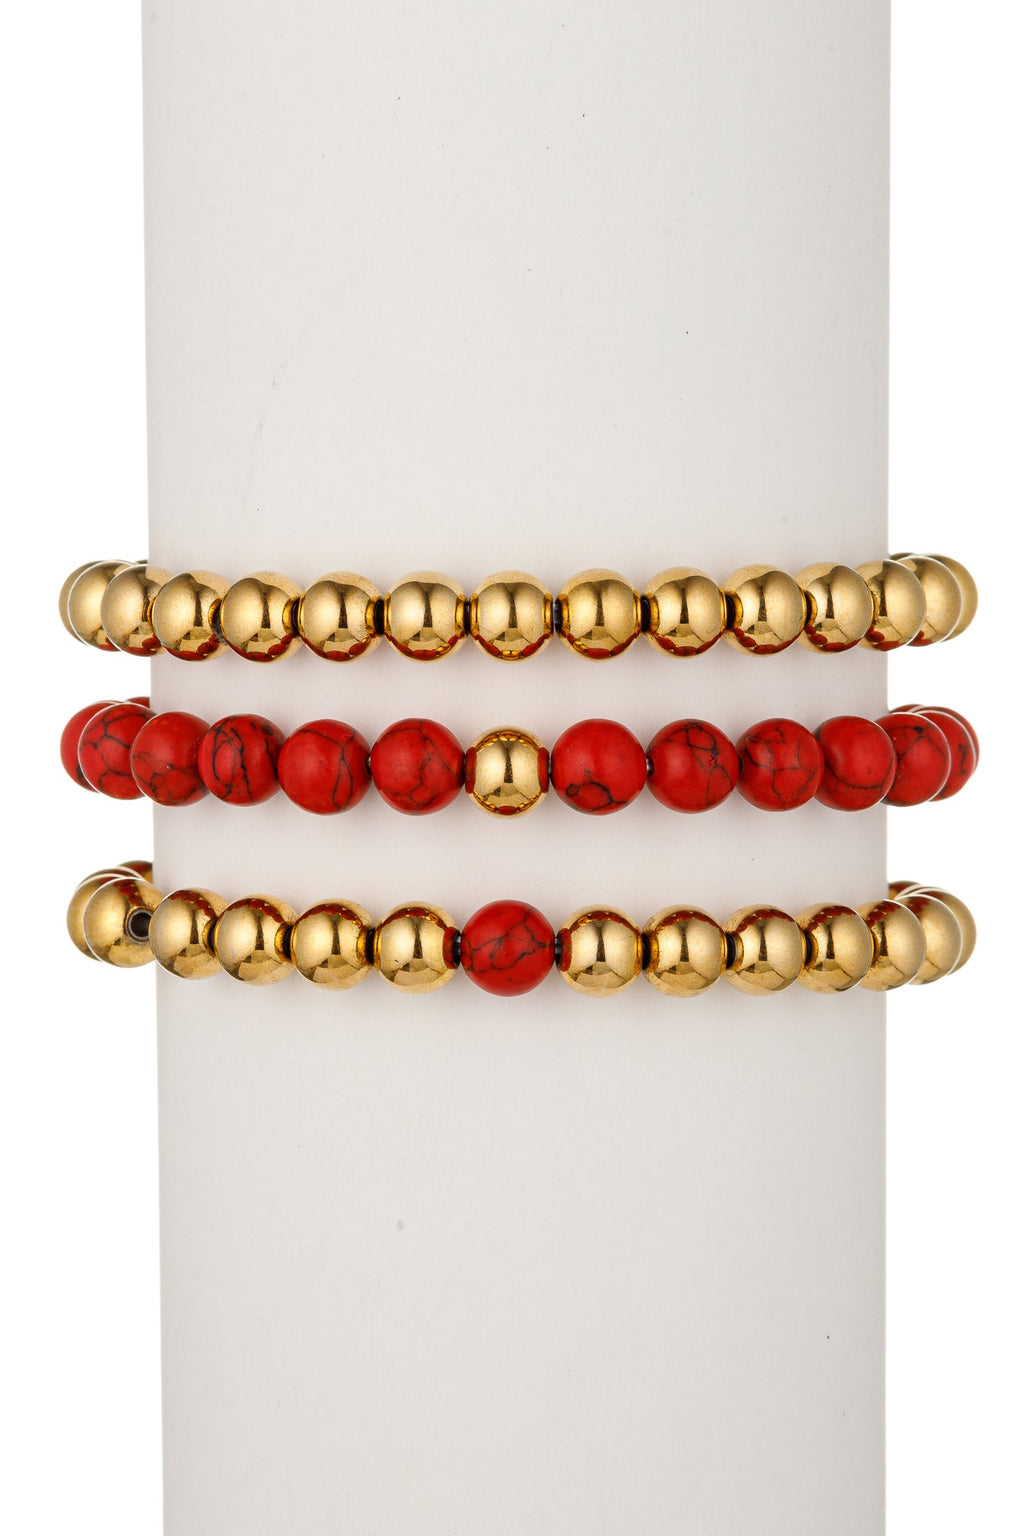 Elie 3 Piece 8mm Stretch Beaded Bracelet Set: Elevate Your Wrist Game with Elegance and Versatility.